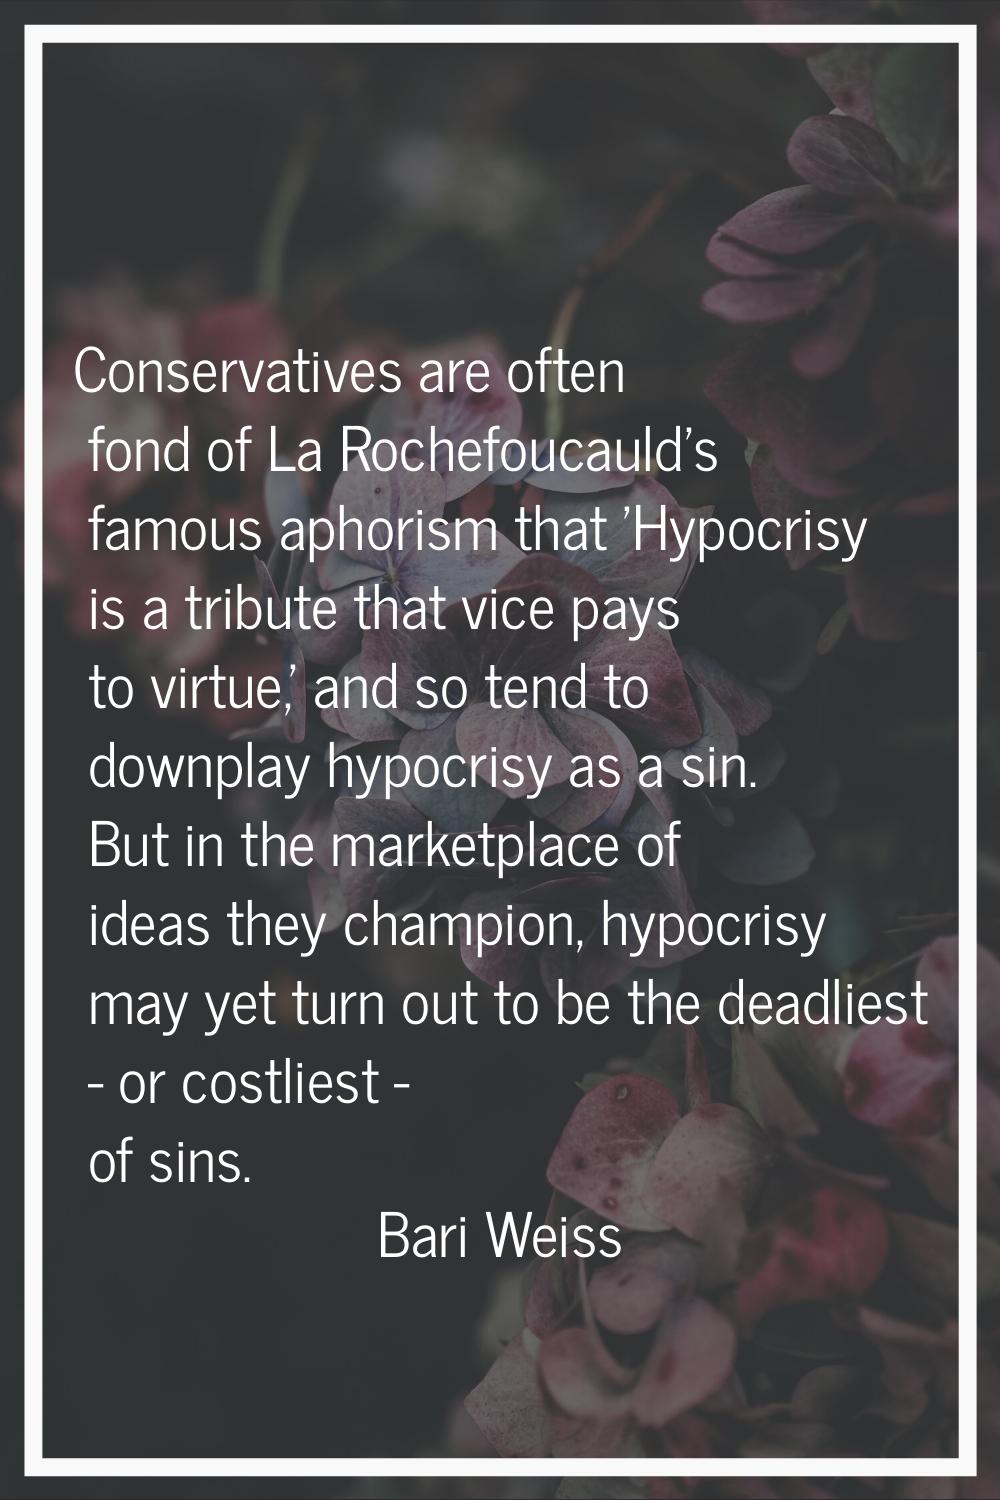 Conservatives are often fond of La Rochefoucauld's famous aphorism that 'Hypocrisy is a tribute tha